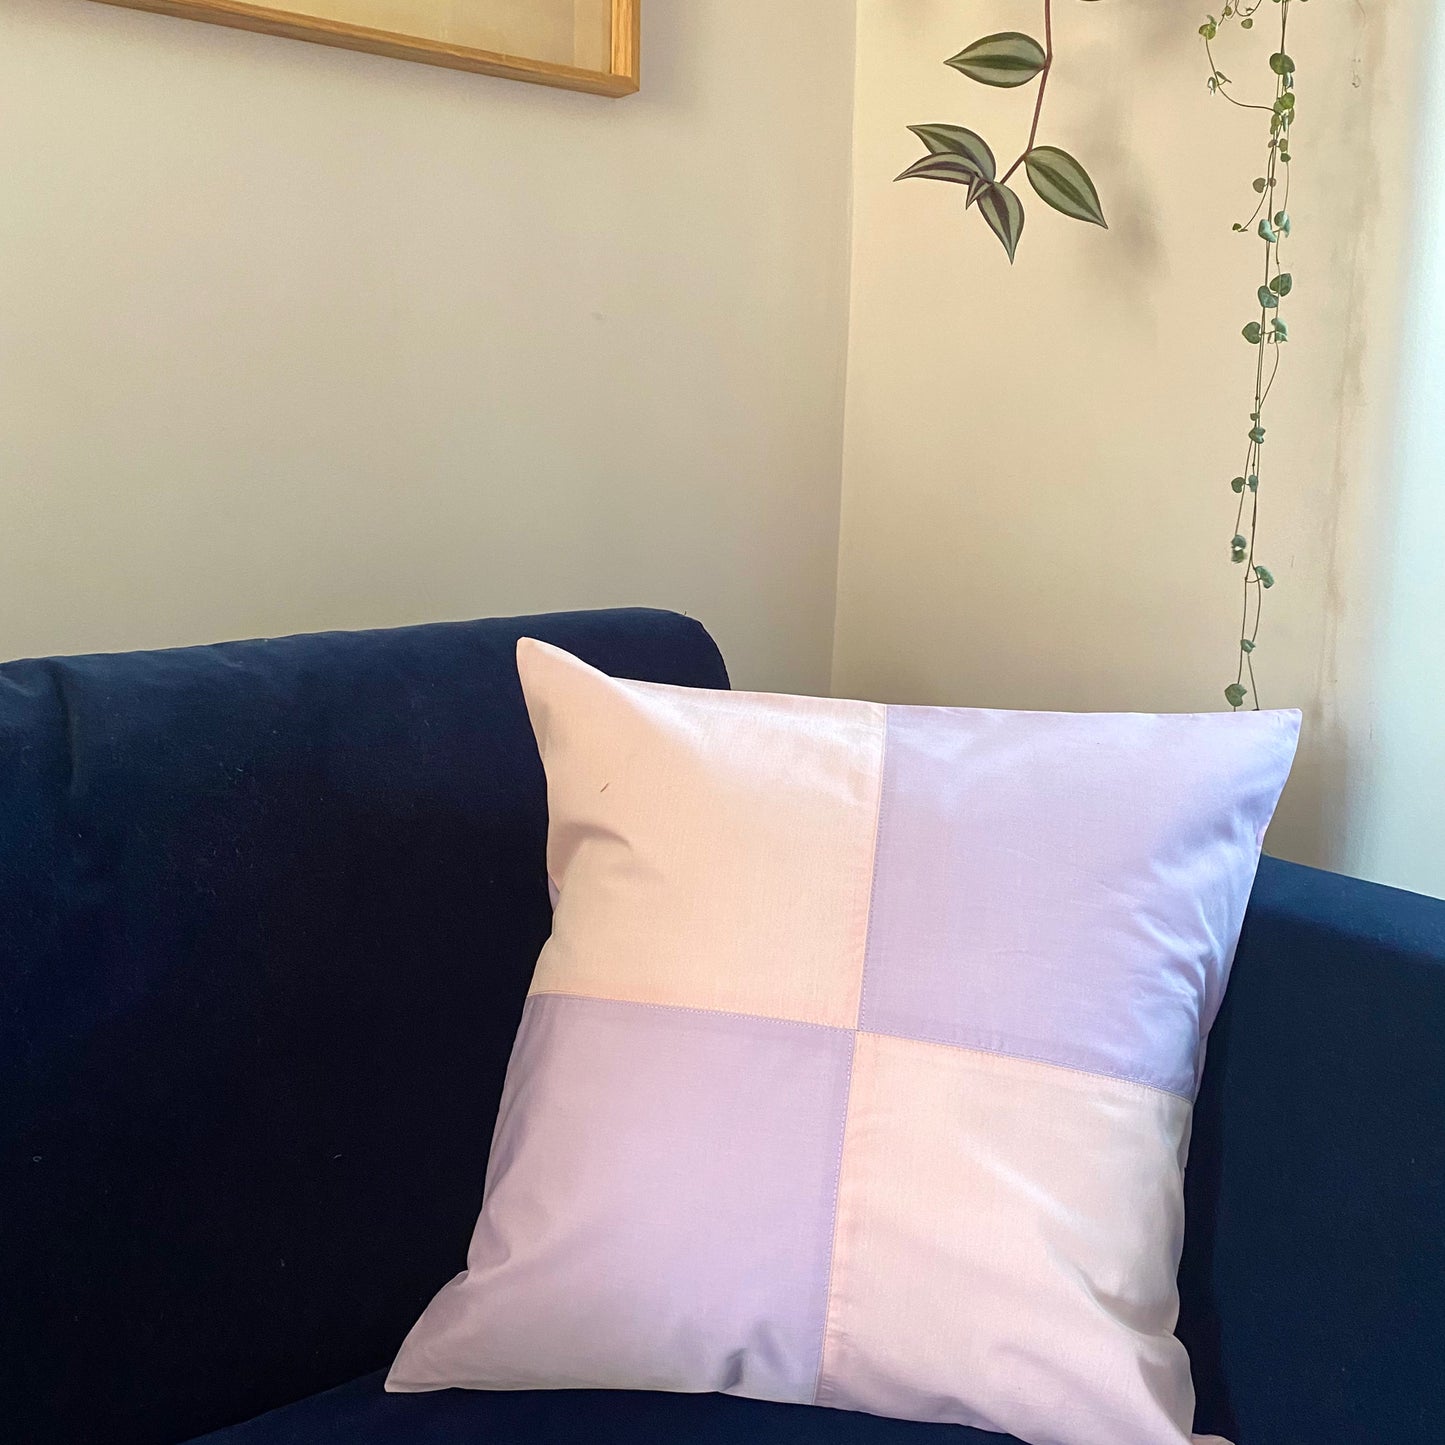 Patchwork cushion, harlequin style cushion, in pink and lilac. Sustainable Homeware, position on a navy sofa against a white wall with green leafy house plants hanging behind